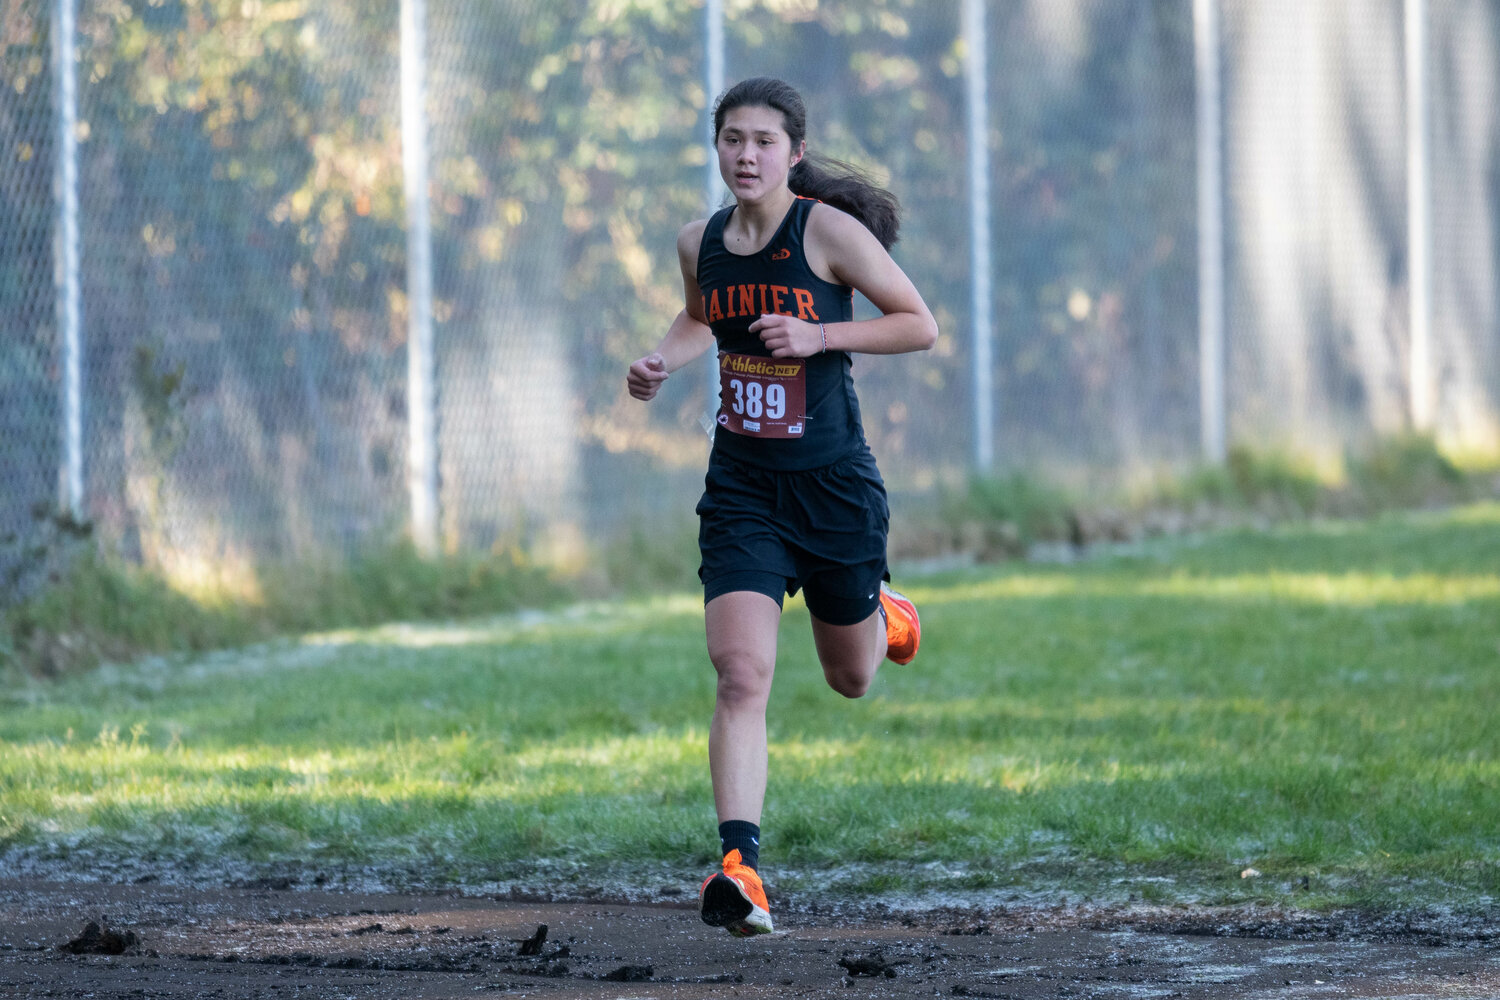 Rainier's Angelica Askey finishes second in the girls' race at the 1B/2B District 4 cross country championship meet on Oct. 28 in Rainier.